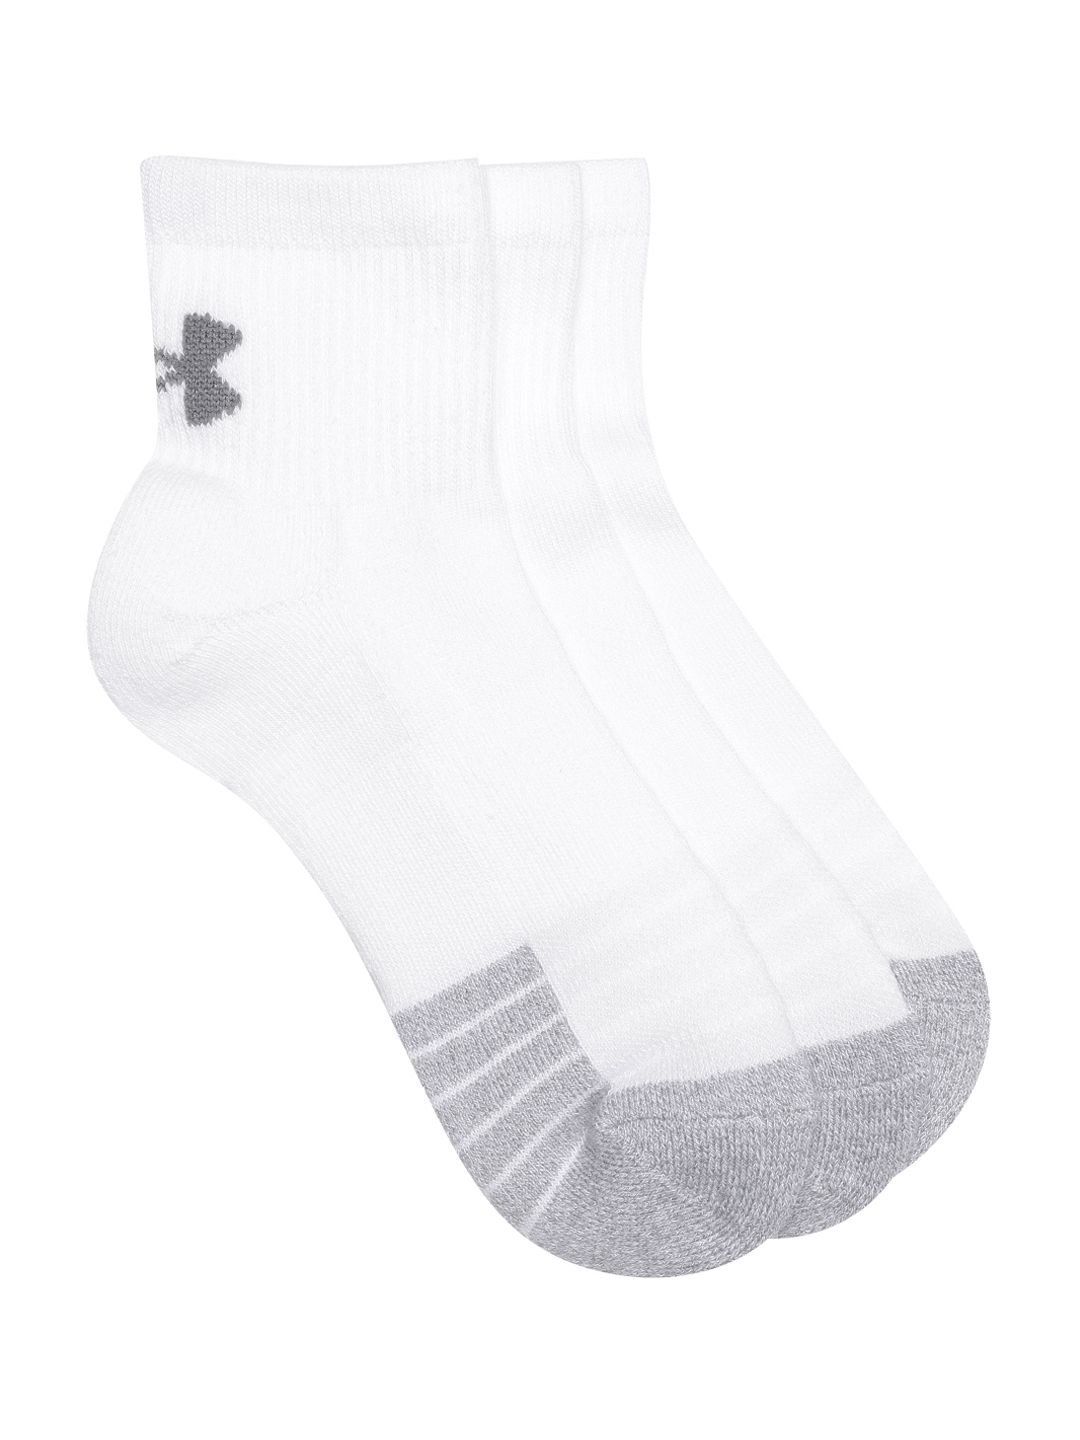 UNDER ARMOUR Unisex Pack of 3 Patterned Heatgear QTR Socks Price in India